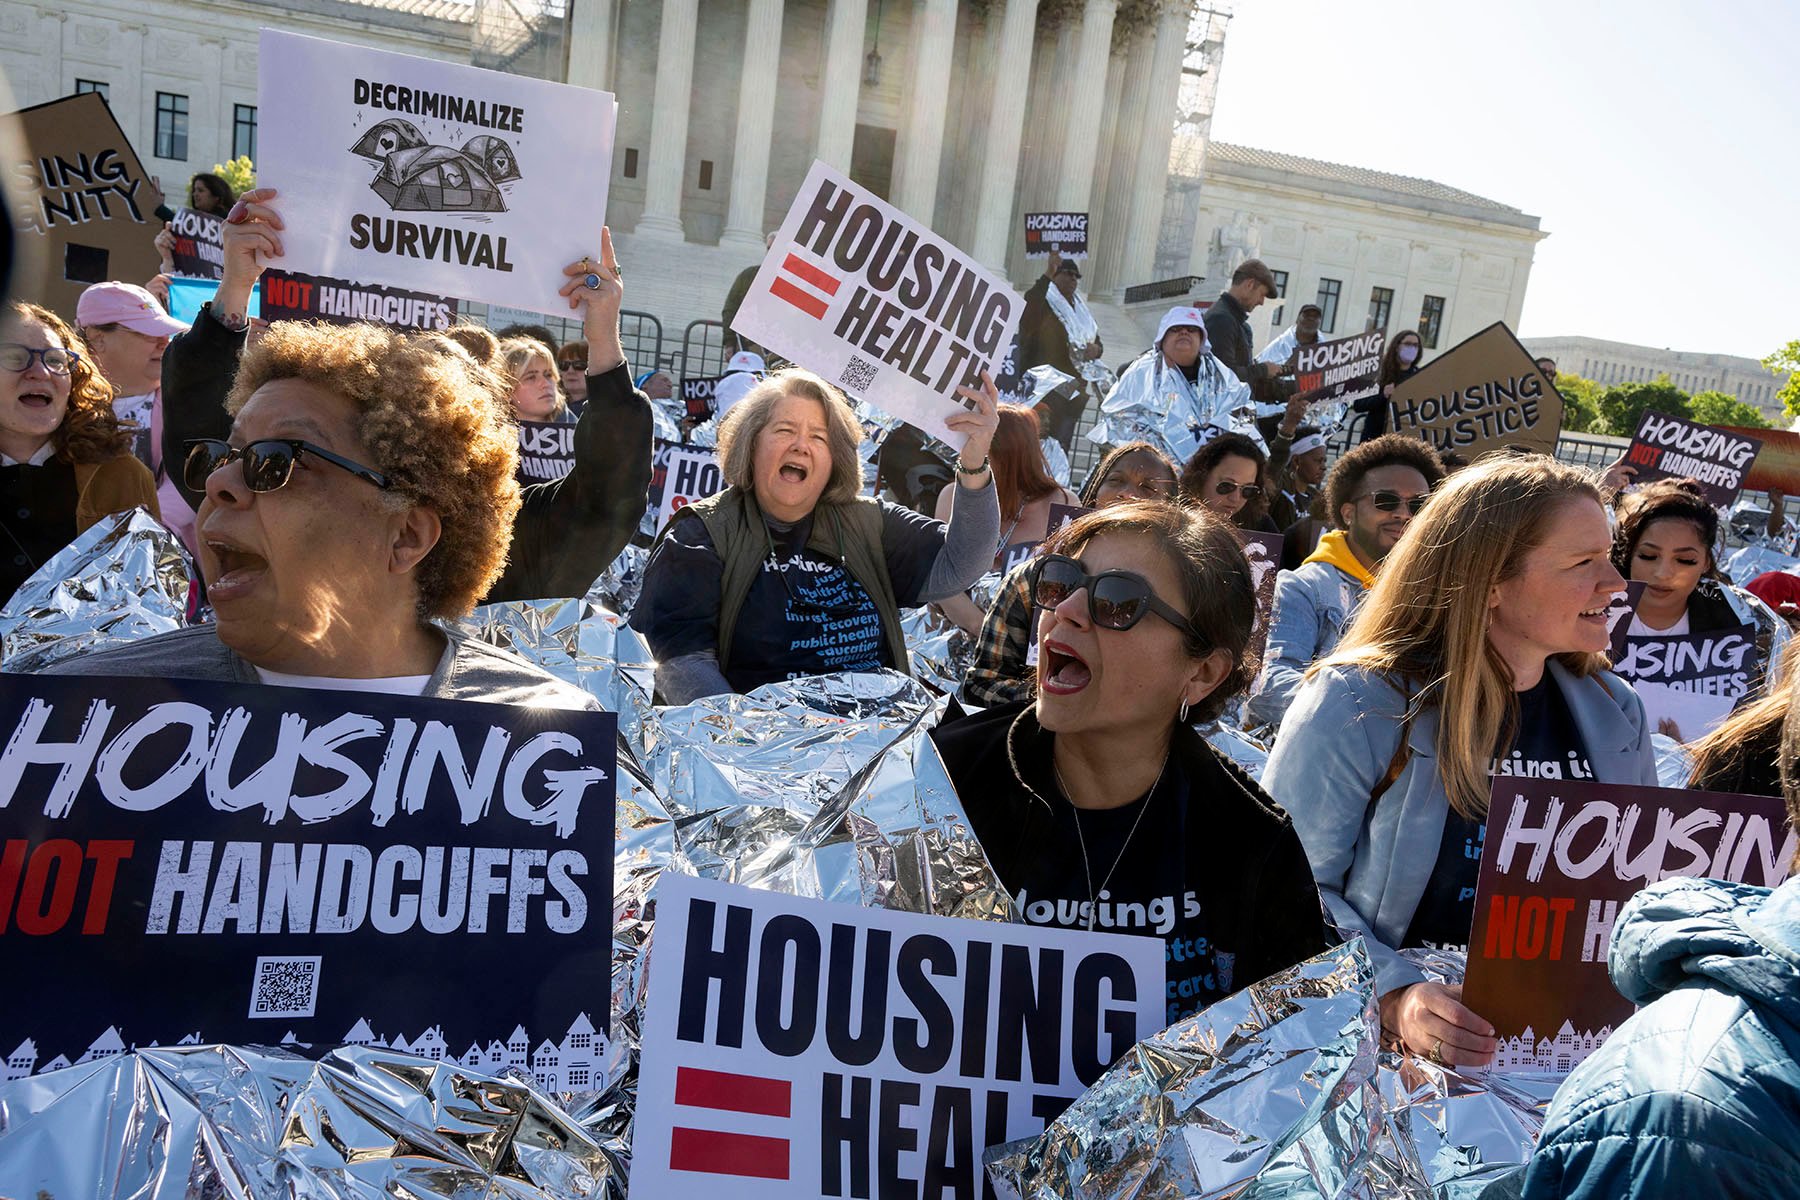 Homeless advocates take part in the "Housing Not Handcuffs" rally in front of the Supreme Court.